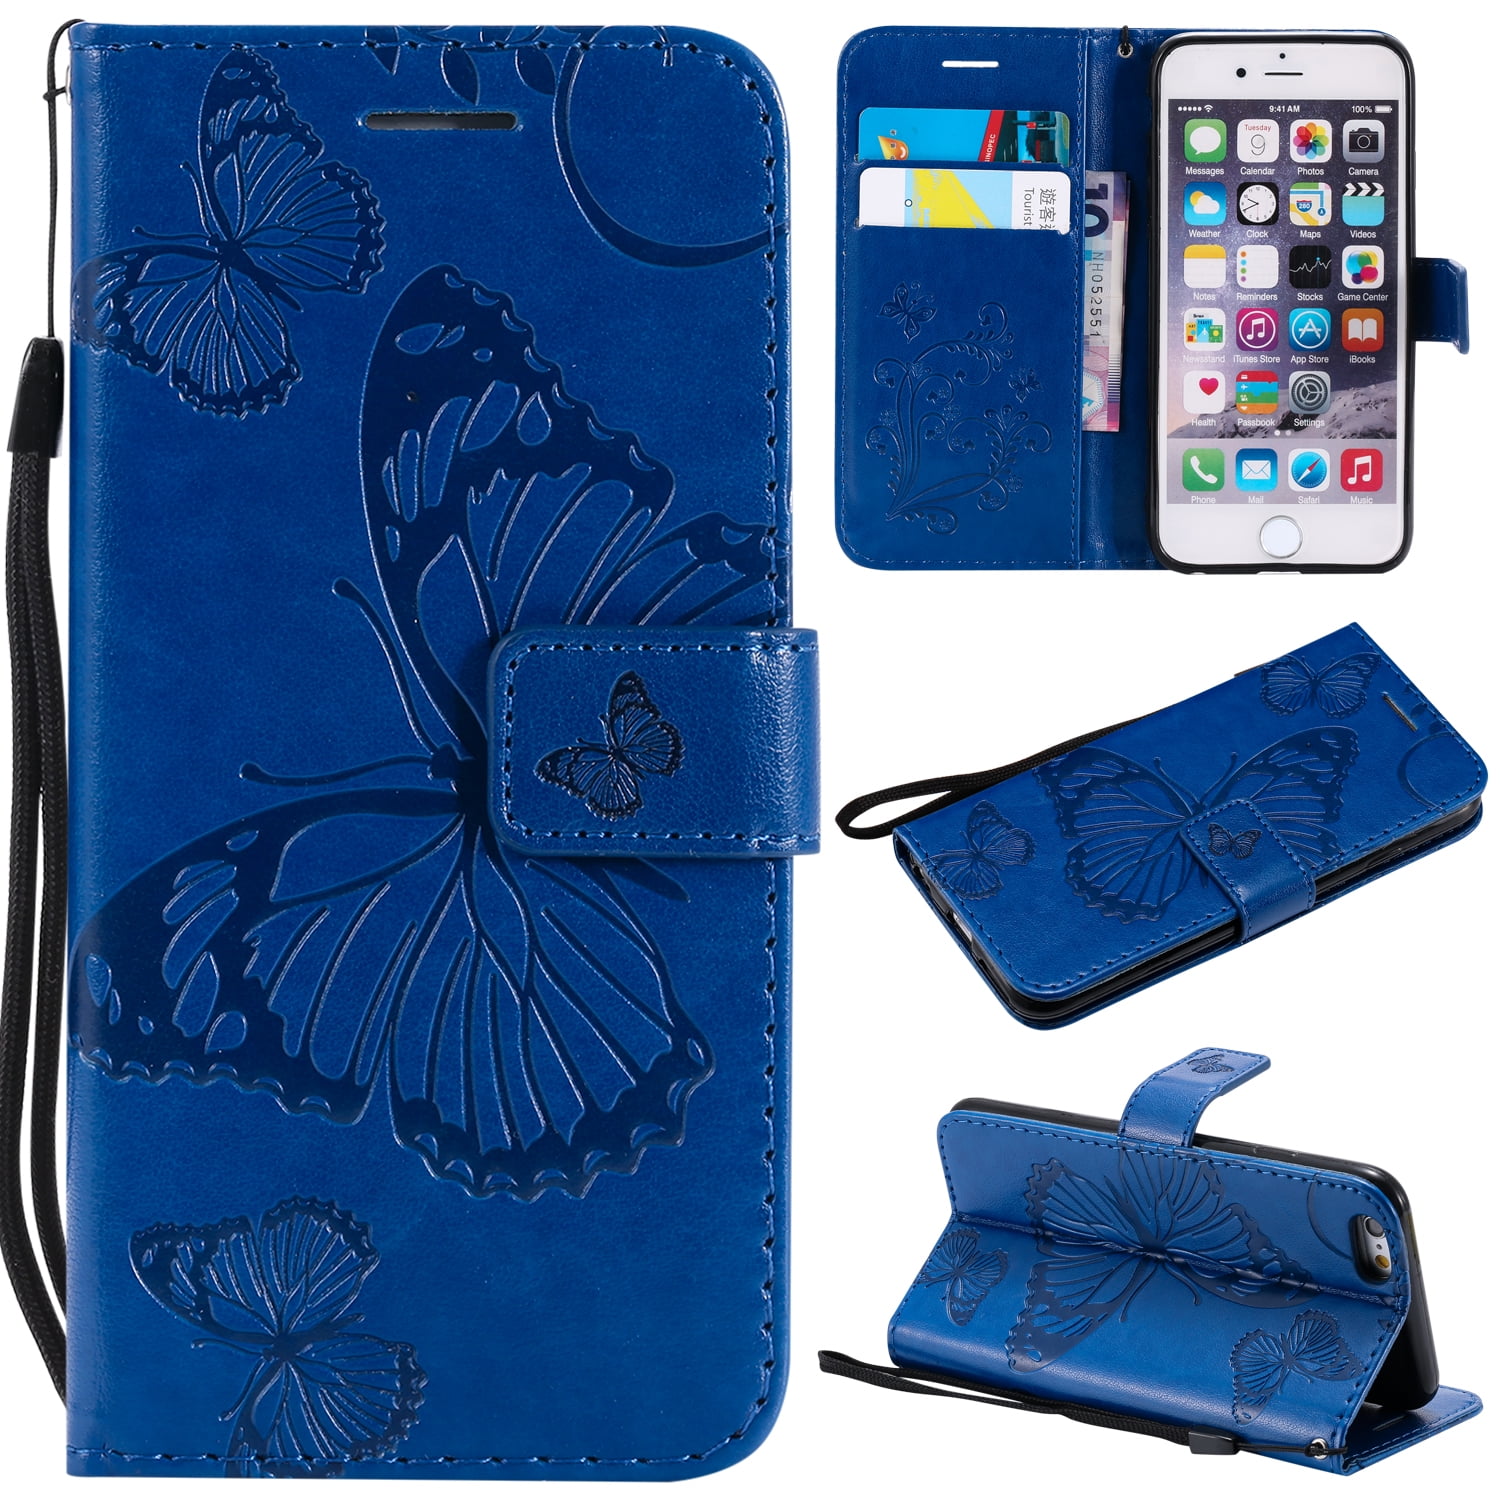 hoop erotisch Verfijning iPhone 6 Plus/ 6S Plus Wallet case, Allytech Pretty Retro Embossed  Butterfly Flower Design PU Leather Book Style Wallet Flip Case Cover for  Apple iPhone 6 Plus and iPhone 6S Plus, Blue -